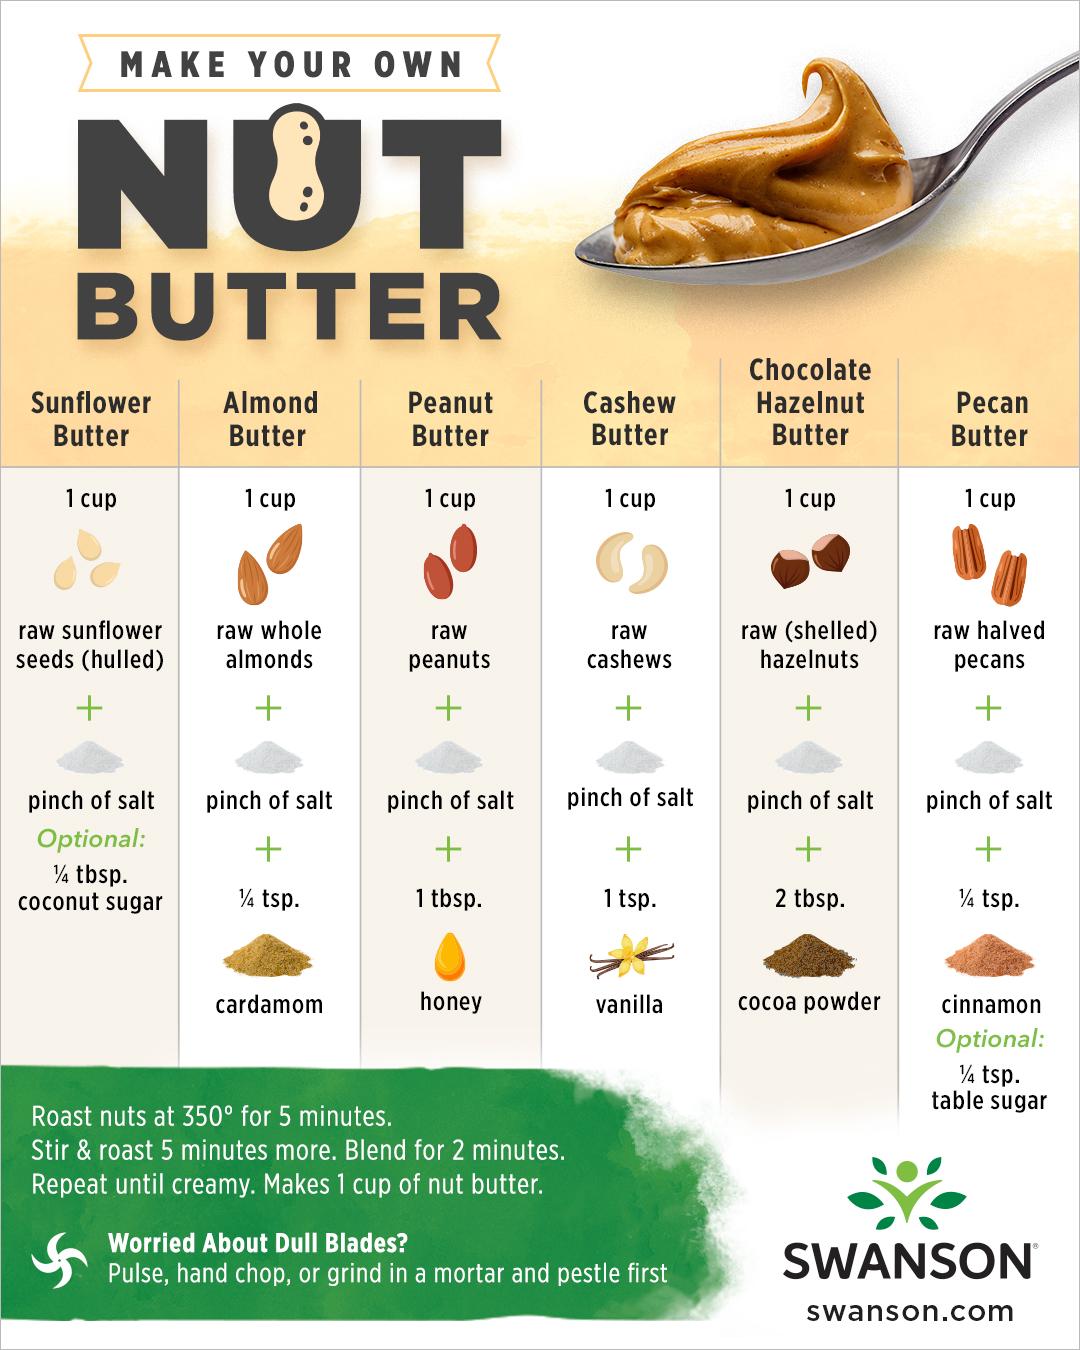 Image showing a spoon of peanut butter along with recipes for different nut butters